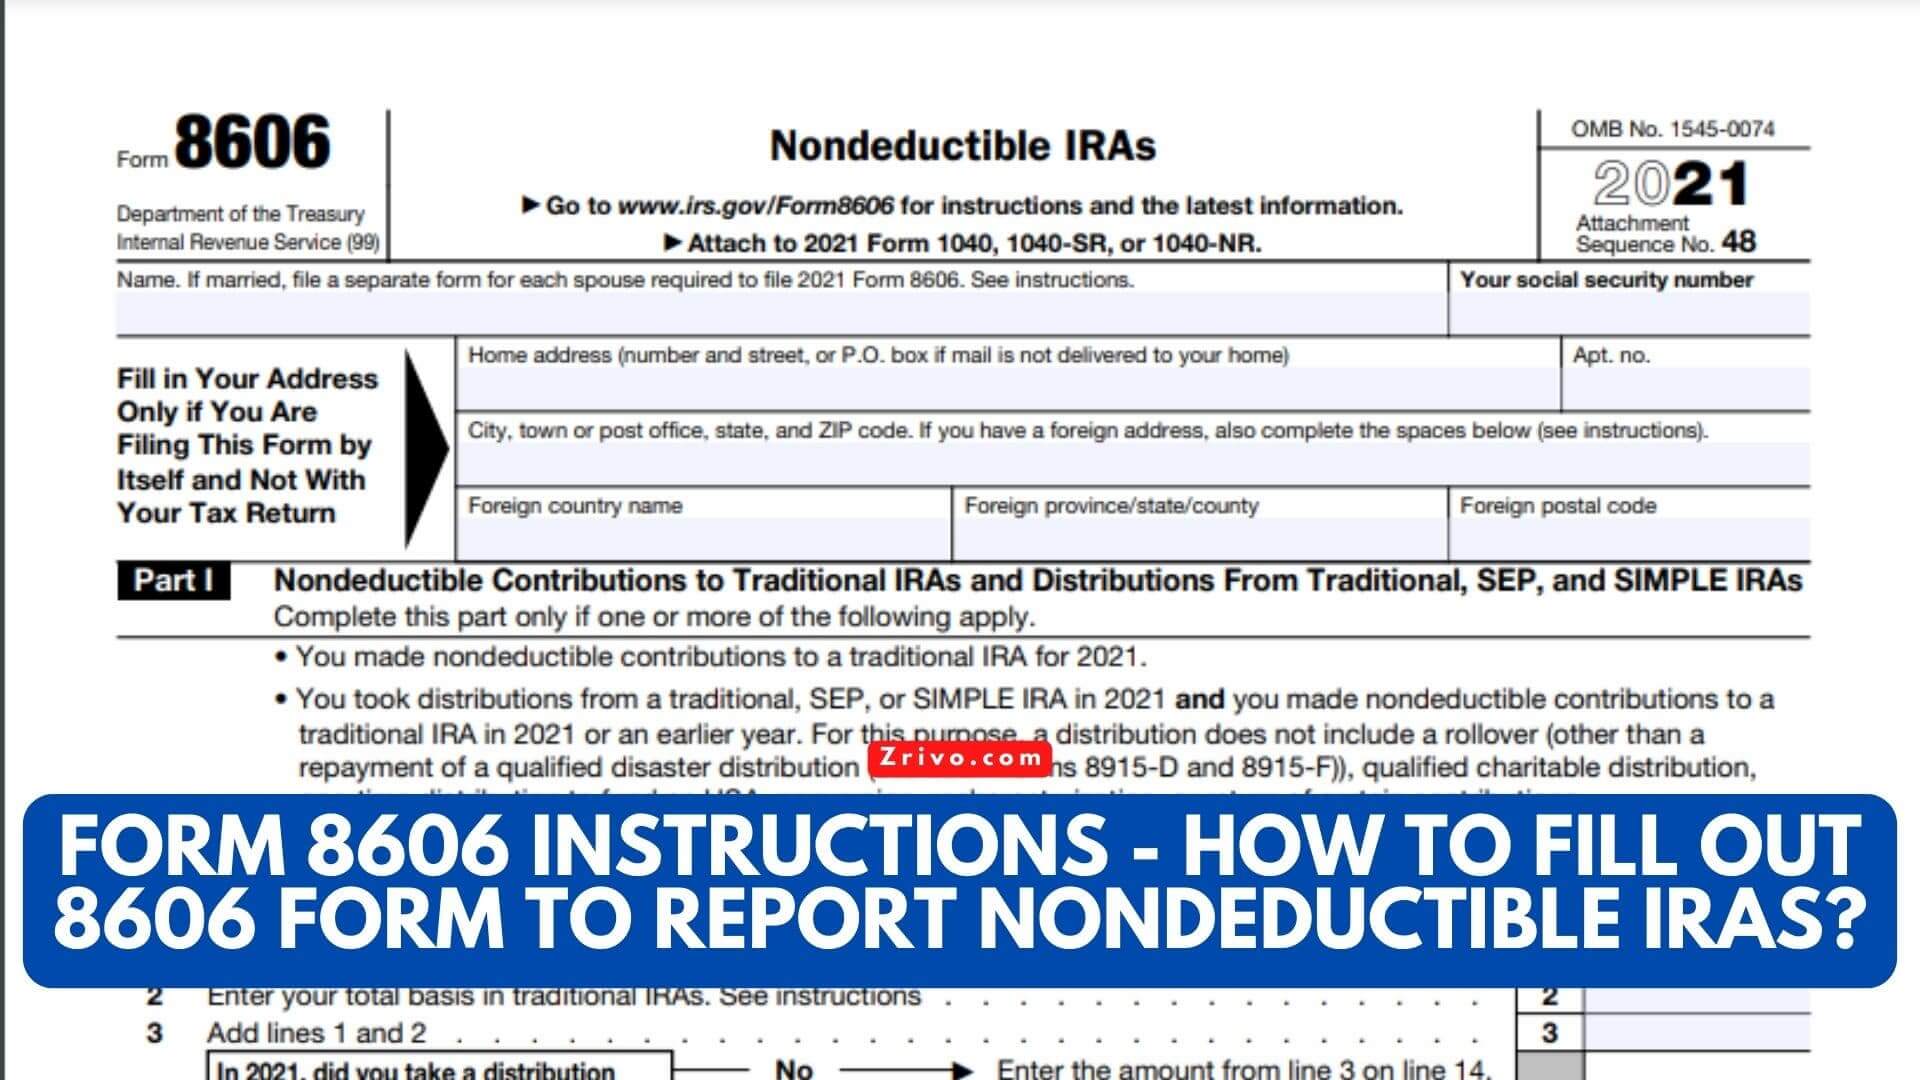 Form 8606 Instructions - How to Fill Out 8606 Form To Report Nondeductible IRAs?